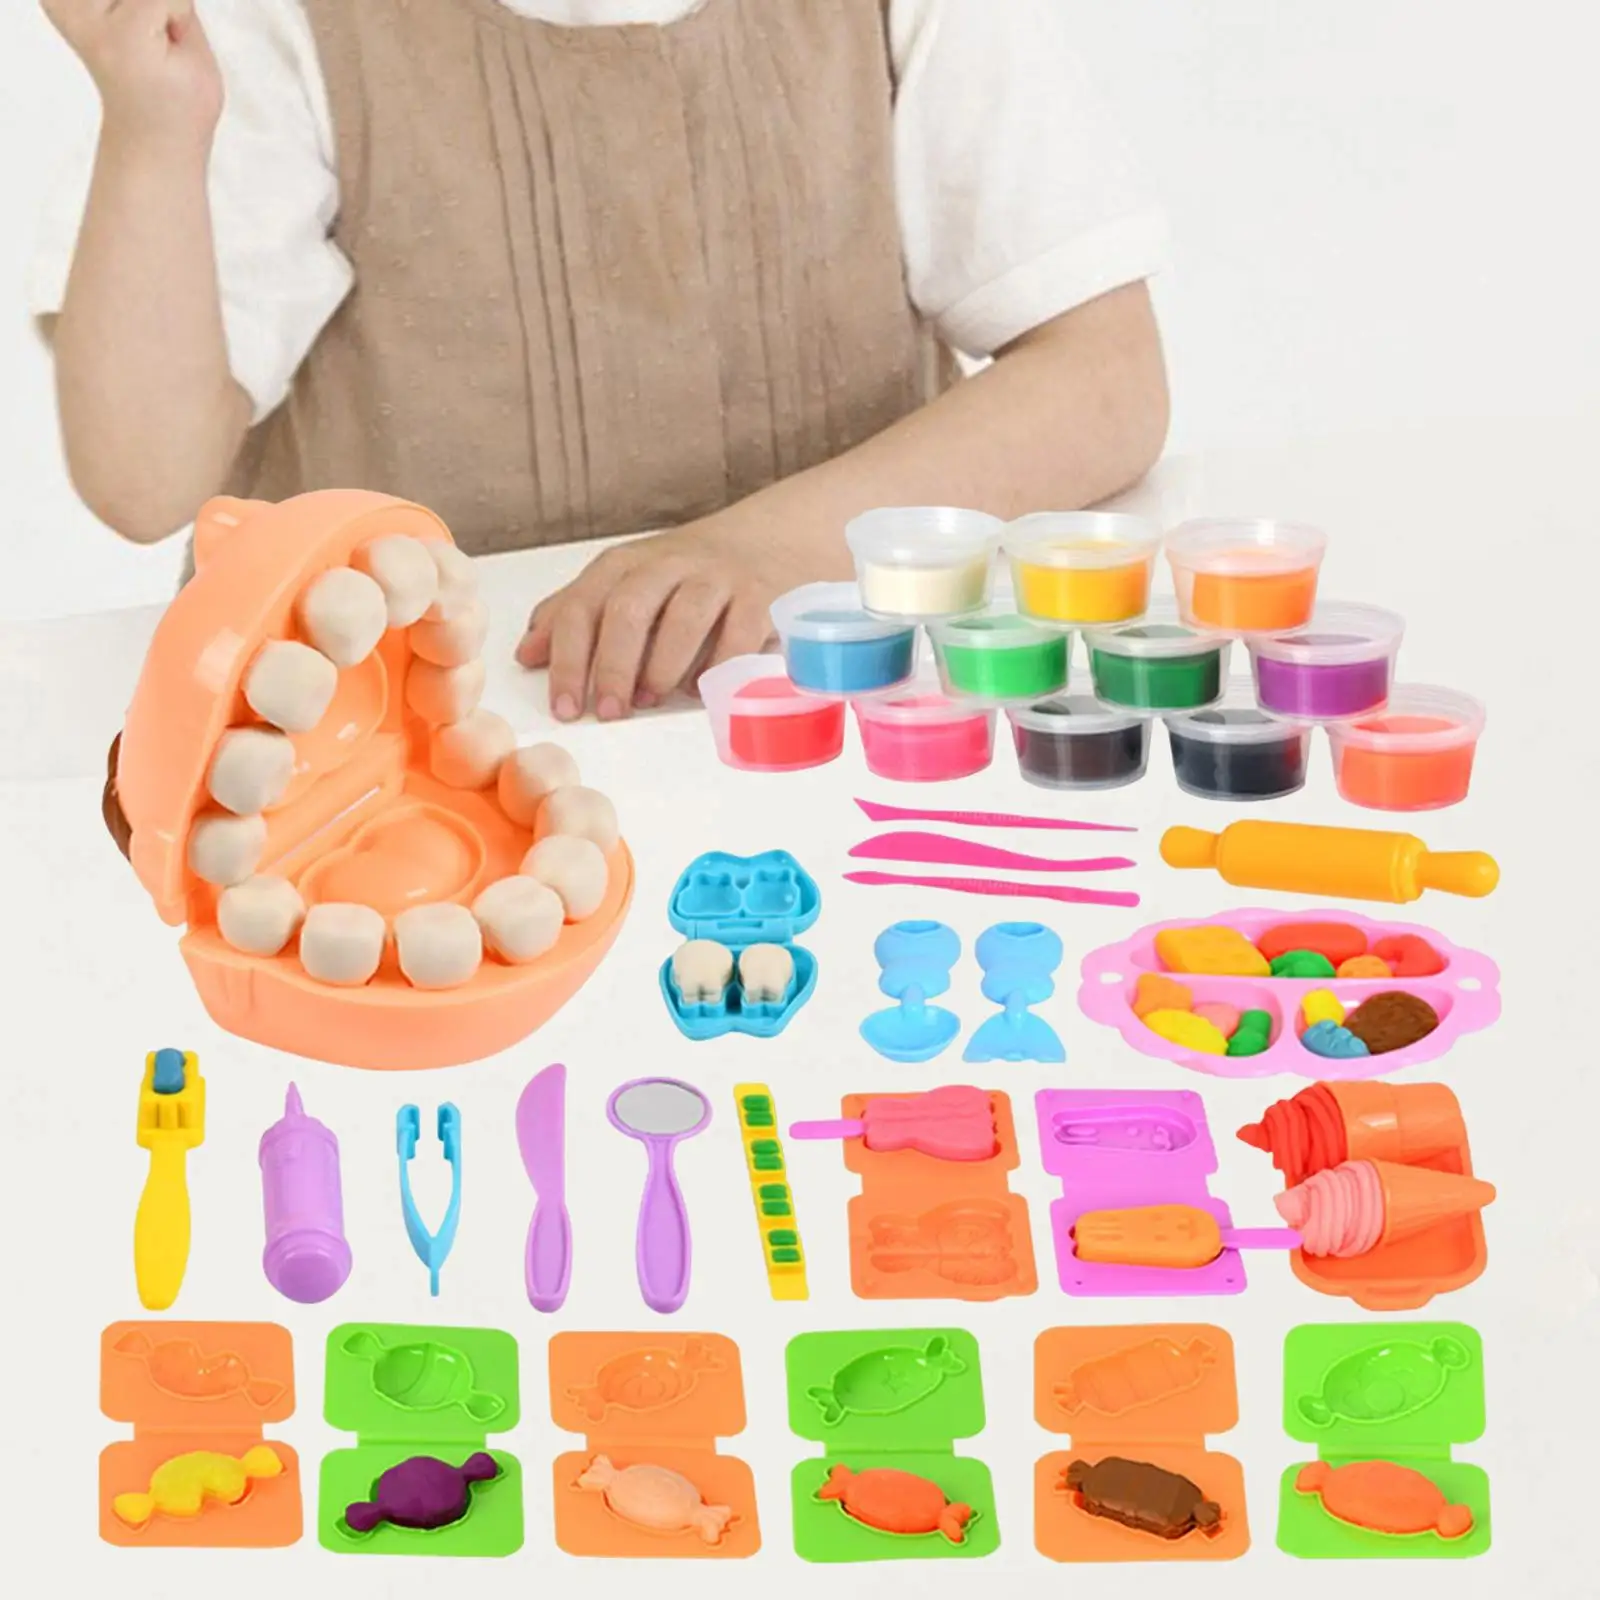 Modeling Clay Set Art Crafts Color Play Set Pretend Play with Accessoires for Children Boys Gift